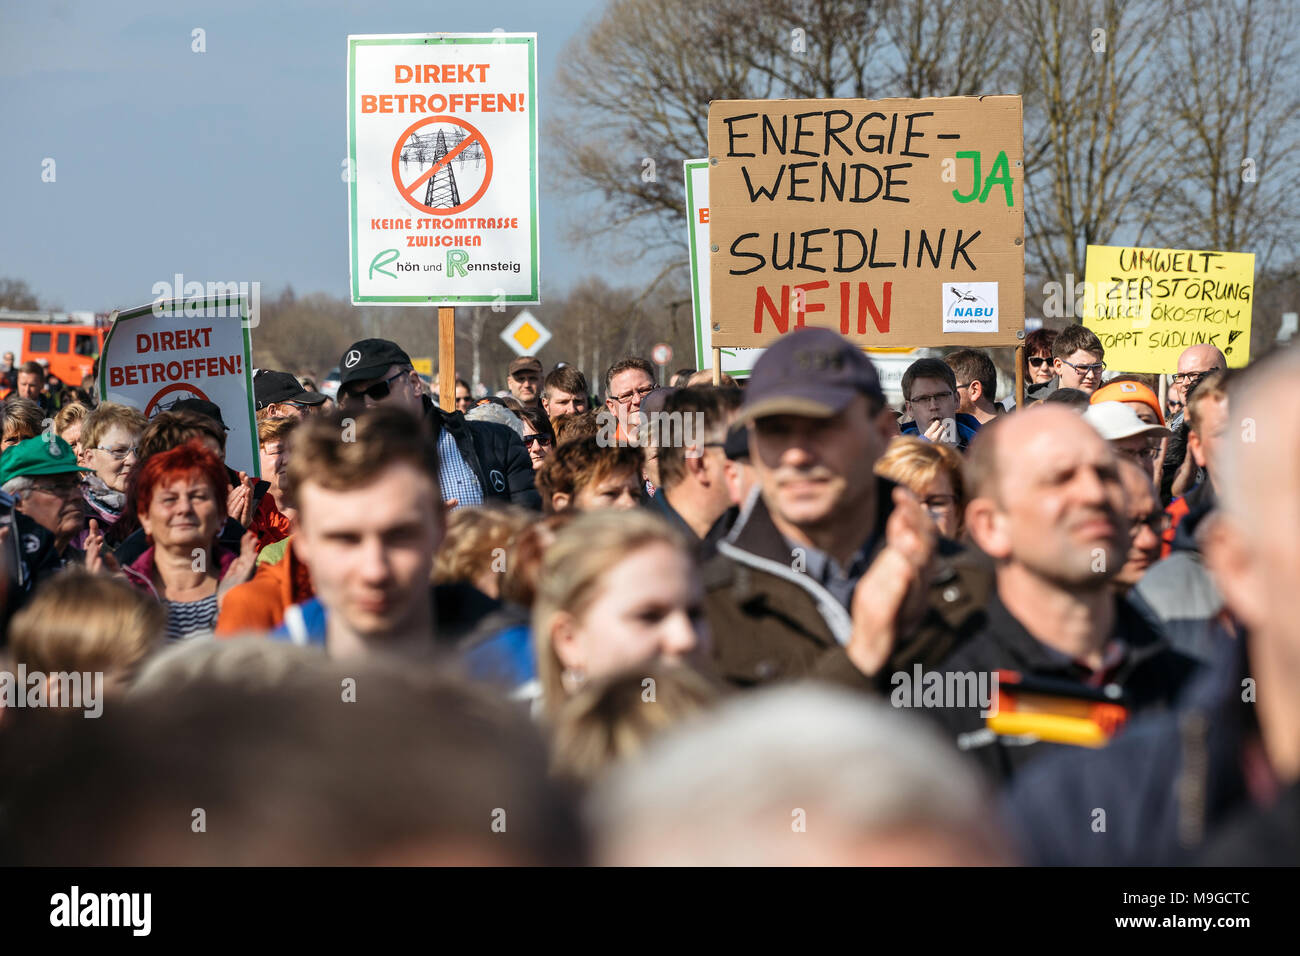 26 March 2018, Germany, Fambach: Numerous people holding up protest signs at the demonstration 'Keine Stromtrasse zwischen Rhön und Rennsteig' (lit. no power lines between Rhoen and Rennsteig). The demonstration is addressing the planned south link likes from network operator Tennet. Photo: Arifoto Ug/Michael Reichel/dpa Stock Photo